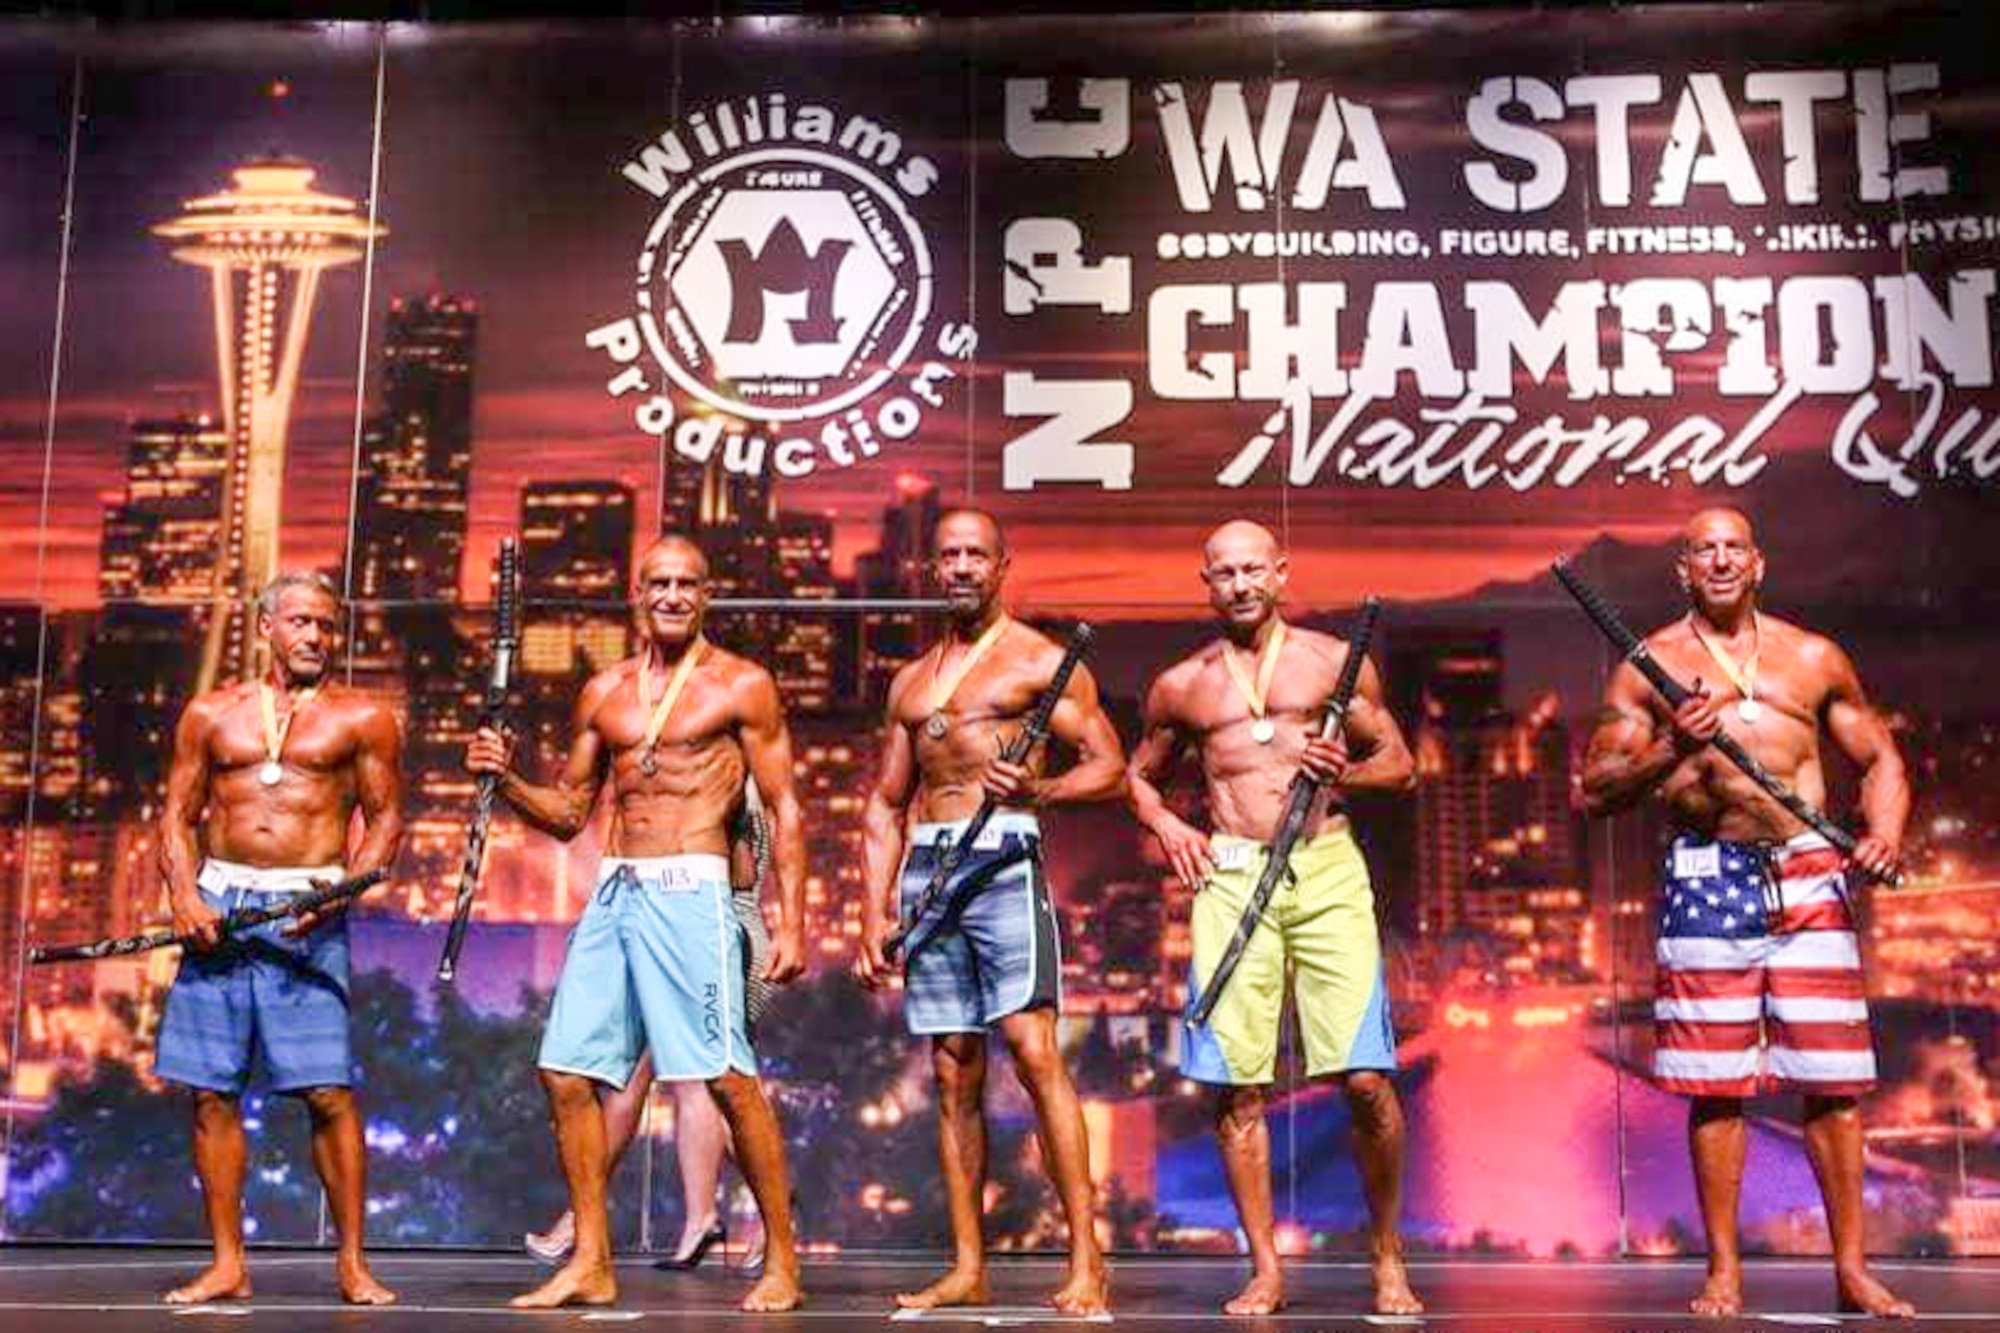 Richard Gonzales (middle), 225th Air Defense Group personnel specialist, wins first place in the Men’s Physique Masters 50 & Older class at the Washington State Championship for bodybuilding at the Auburn Performing Arts Center in Auburn, Aug. 4, 2018.